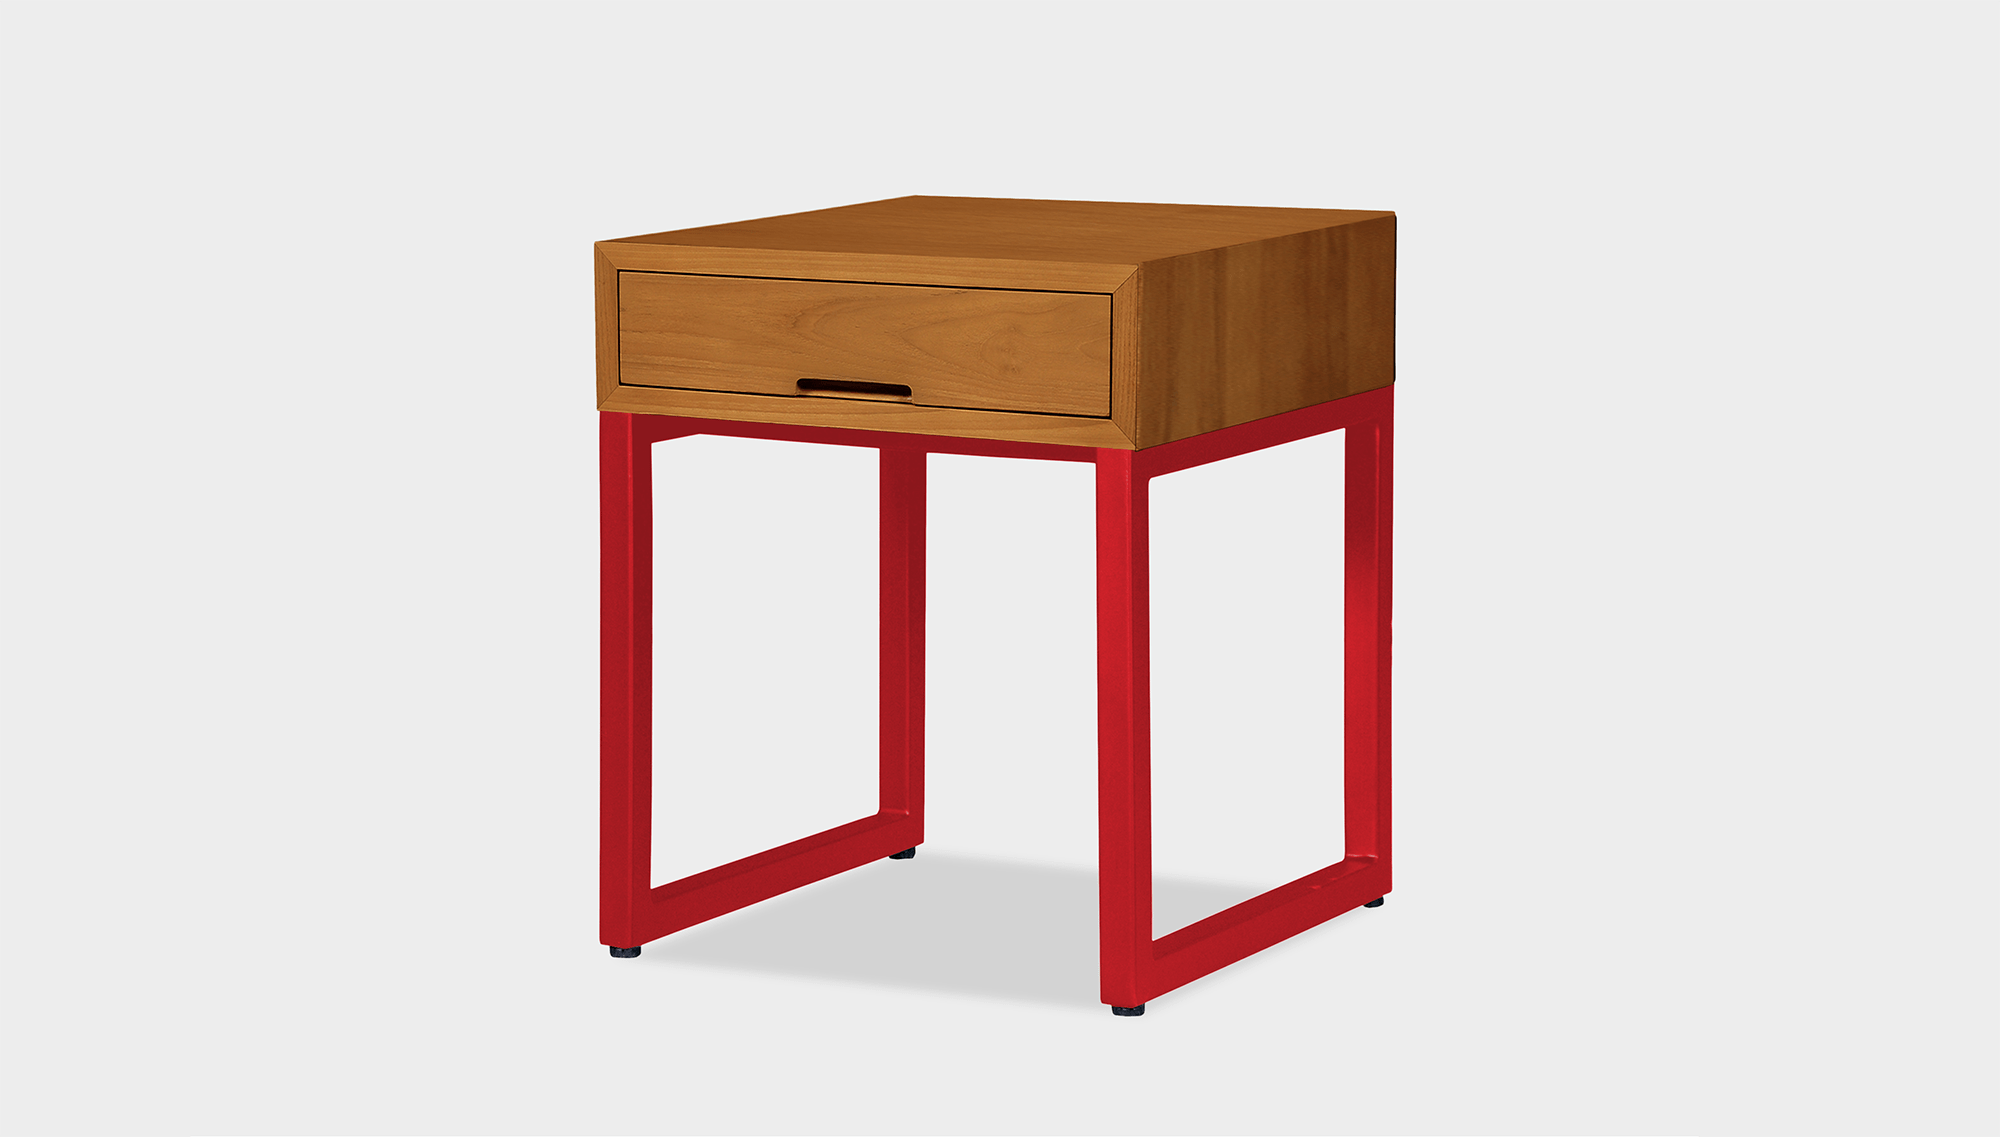 reddie-raw bedside table 45W x 45D x 55H *cm / Wood Teak~Natural / Metal~Red Suzy Bedside Table High Square